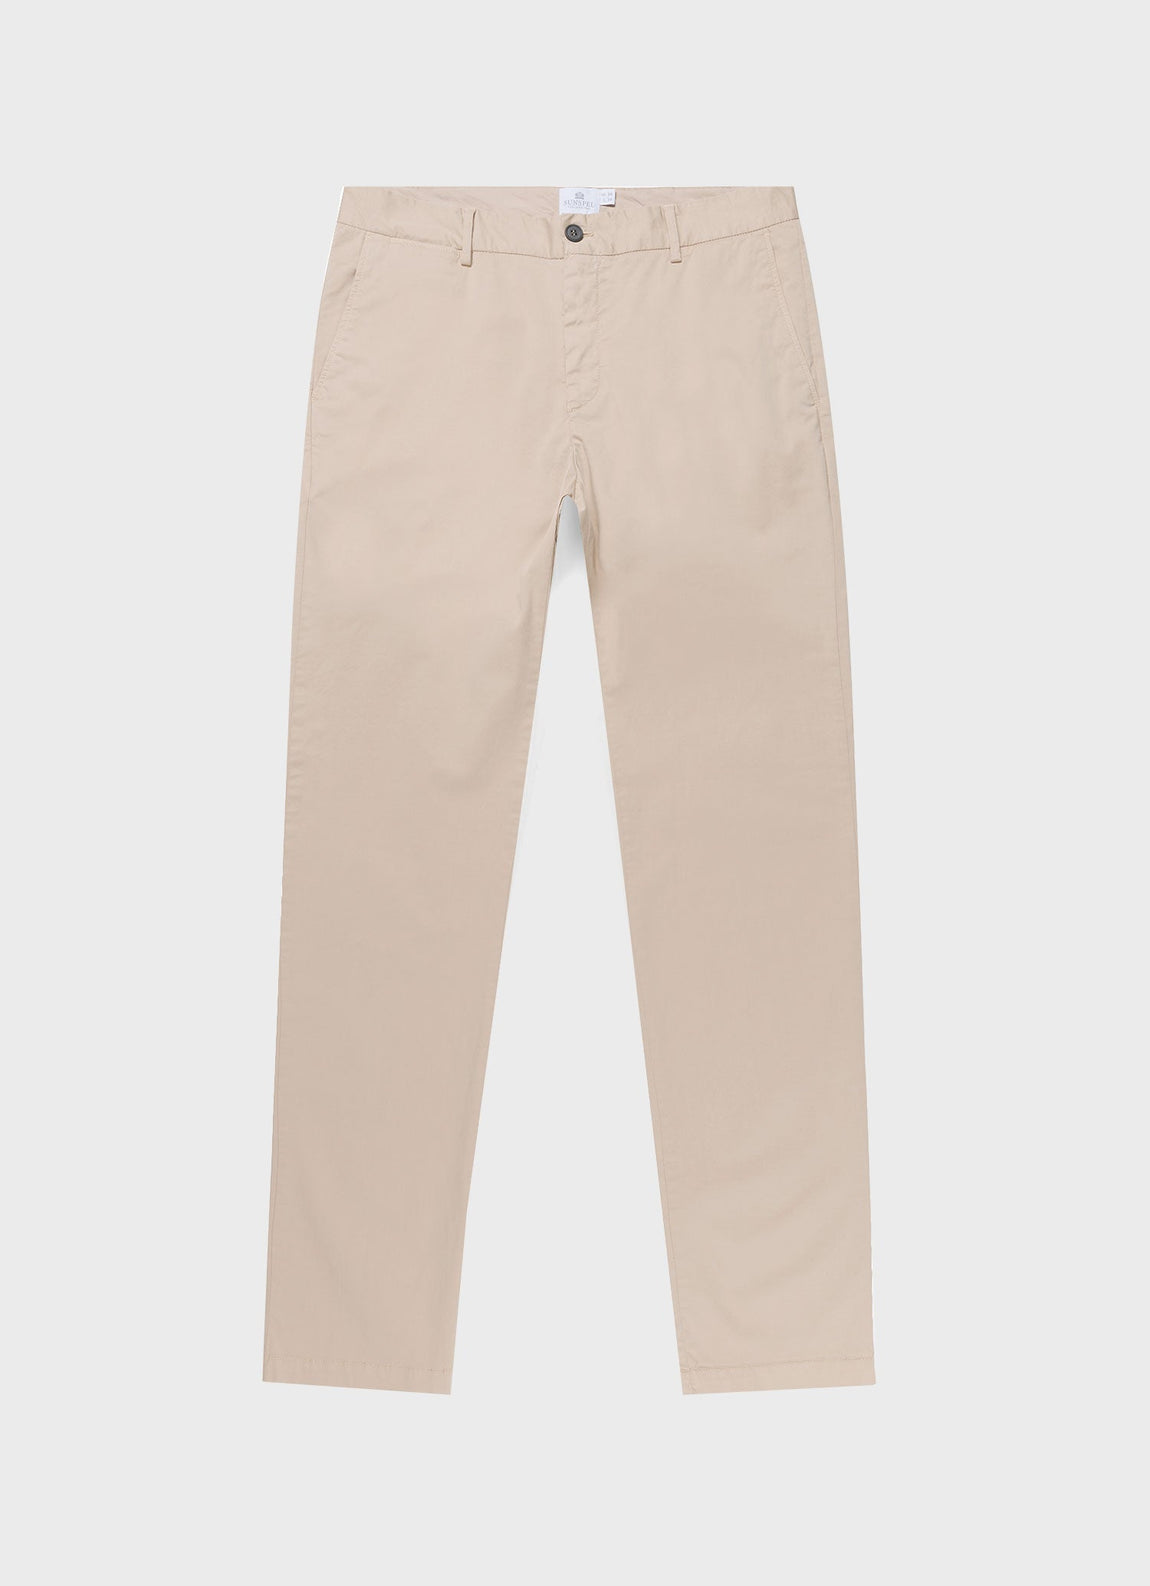 Shop Athletic Fit Chino Pants for Men